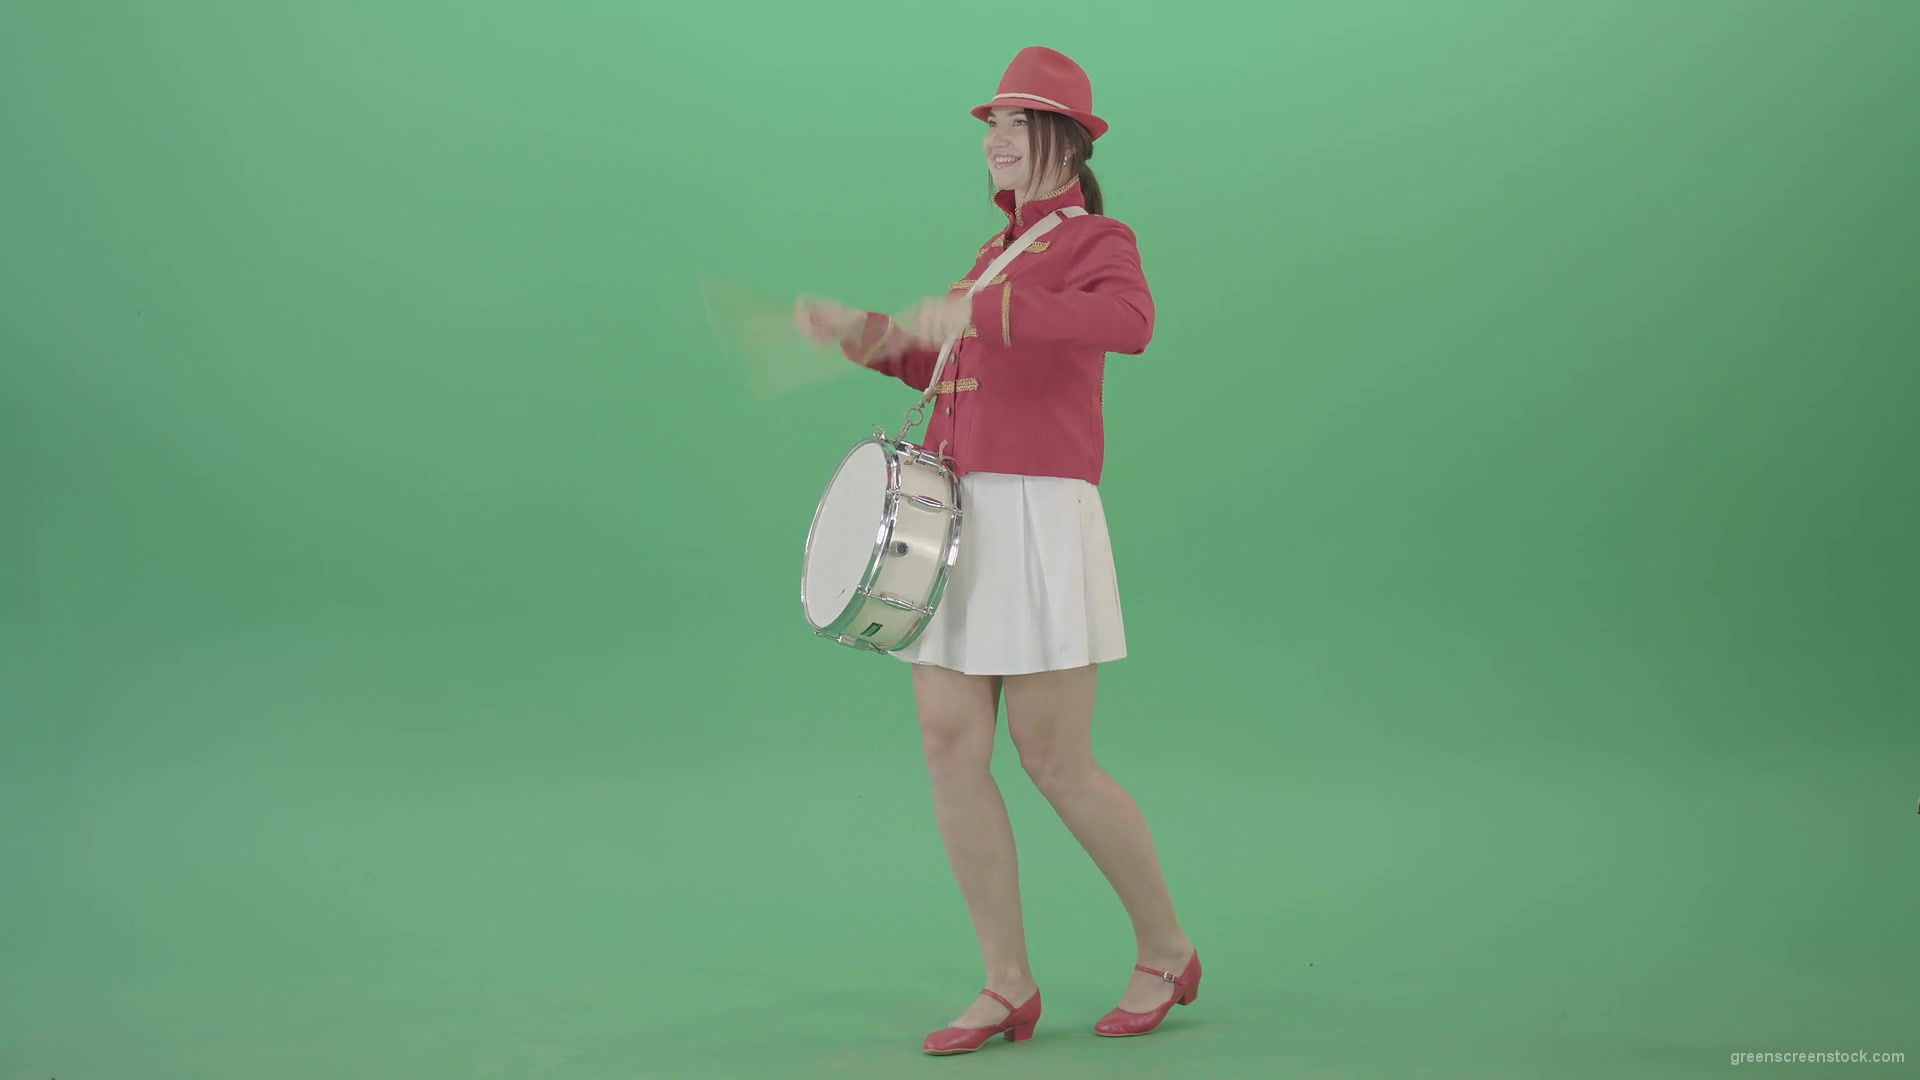 Funny-Girl-in-red-white-uniform-makes-percussion-and-play-drums-isolated-on-green-screen-4K-Video-Footage-1920_009 Green Screen Stock